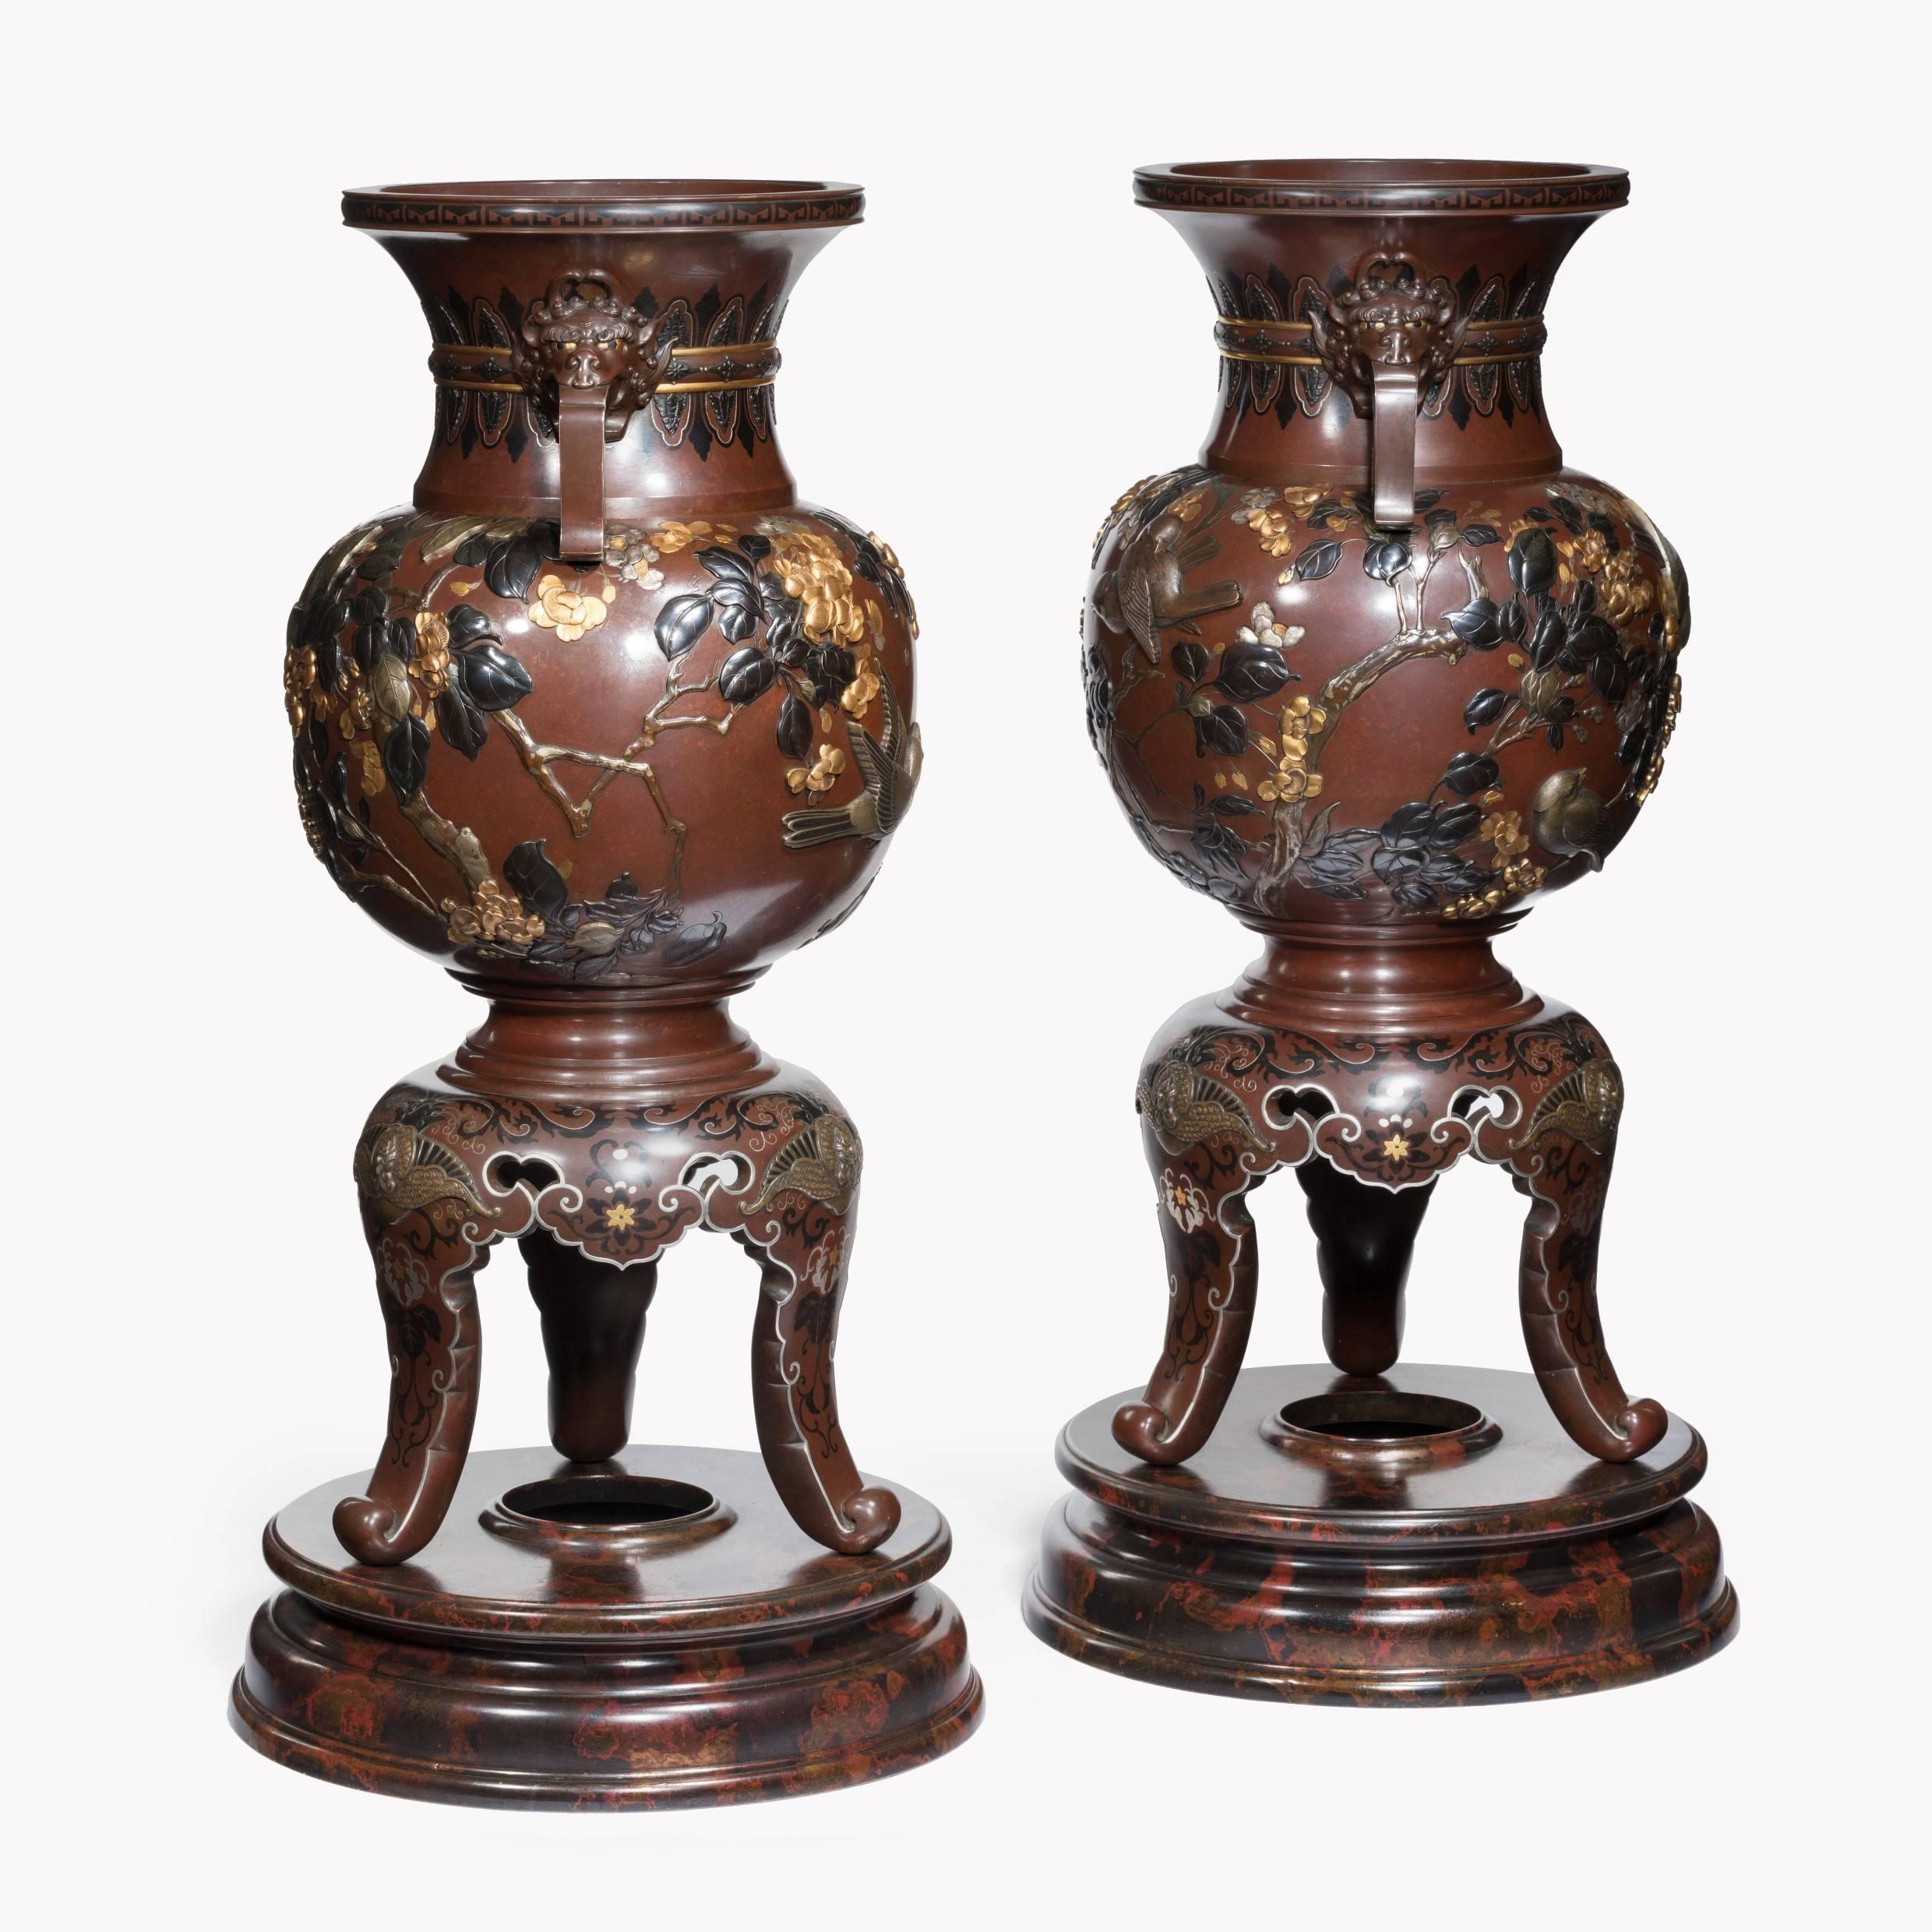 Pair of Exhibition Quality Meiji Period Rotating Bronze and Mixed Metal Vases In Good Condition For Sale In Lymington, Hampshire